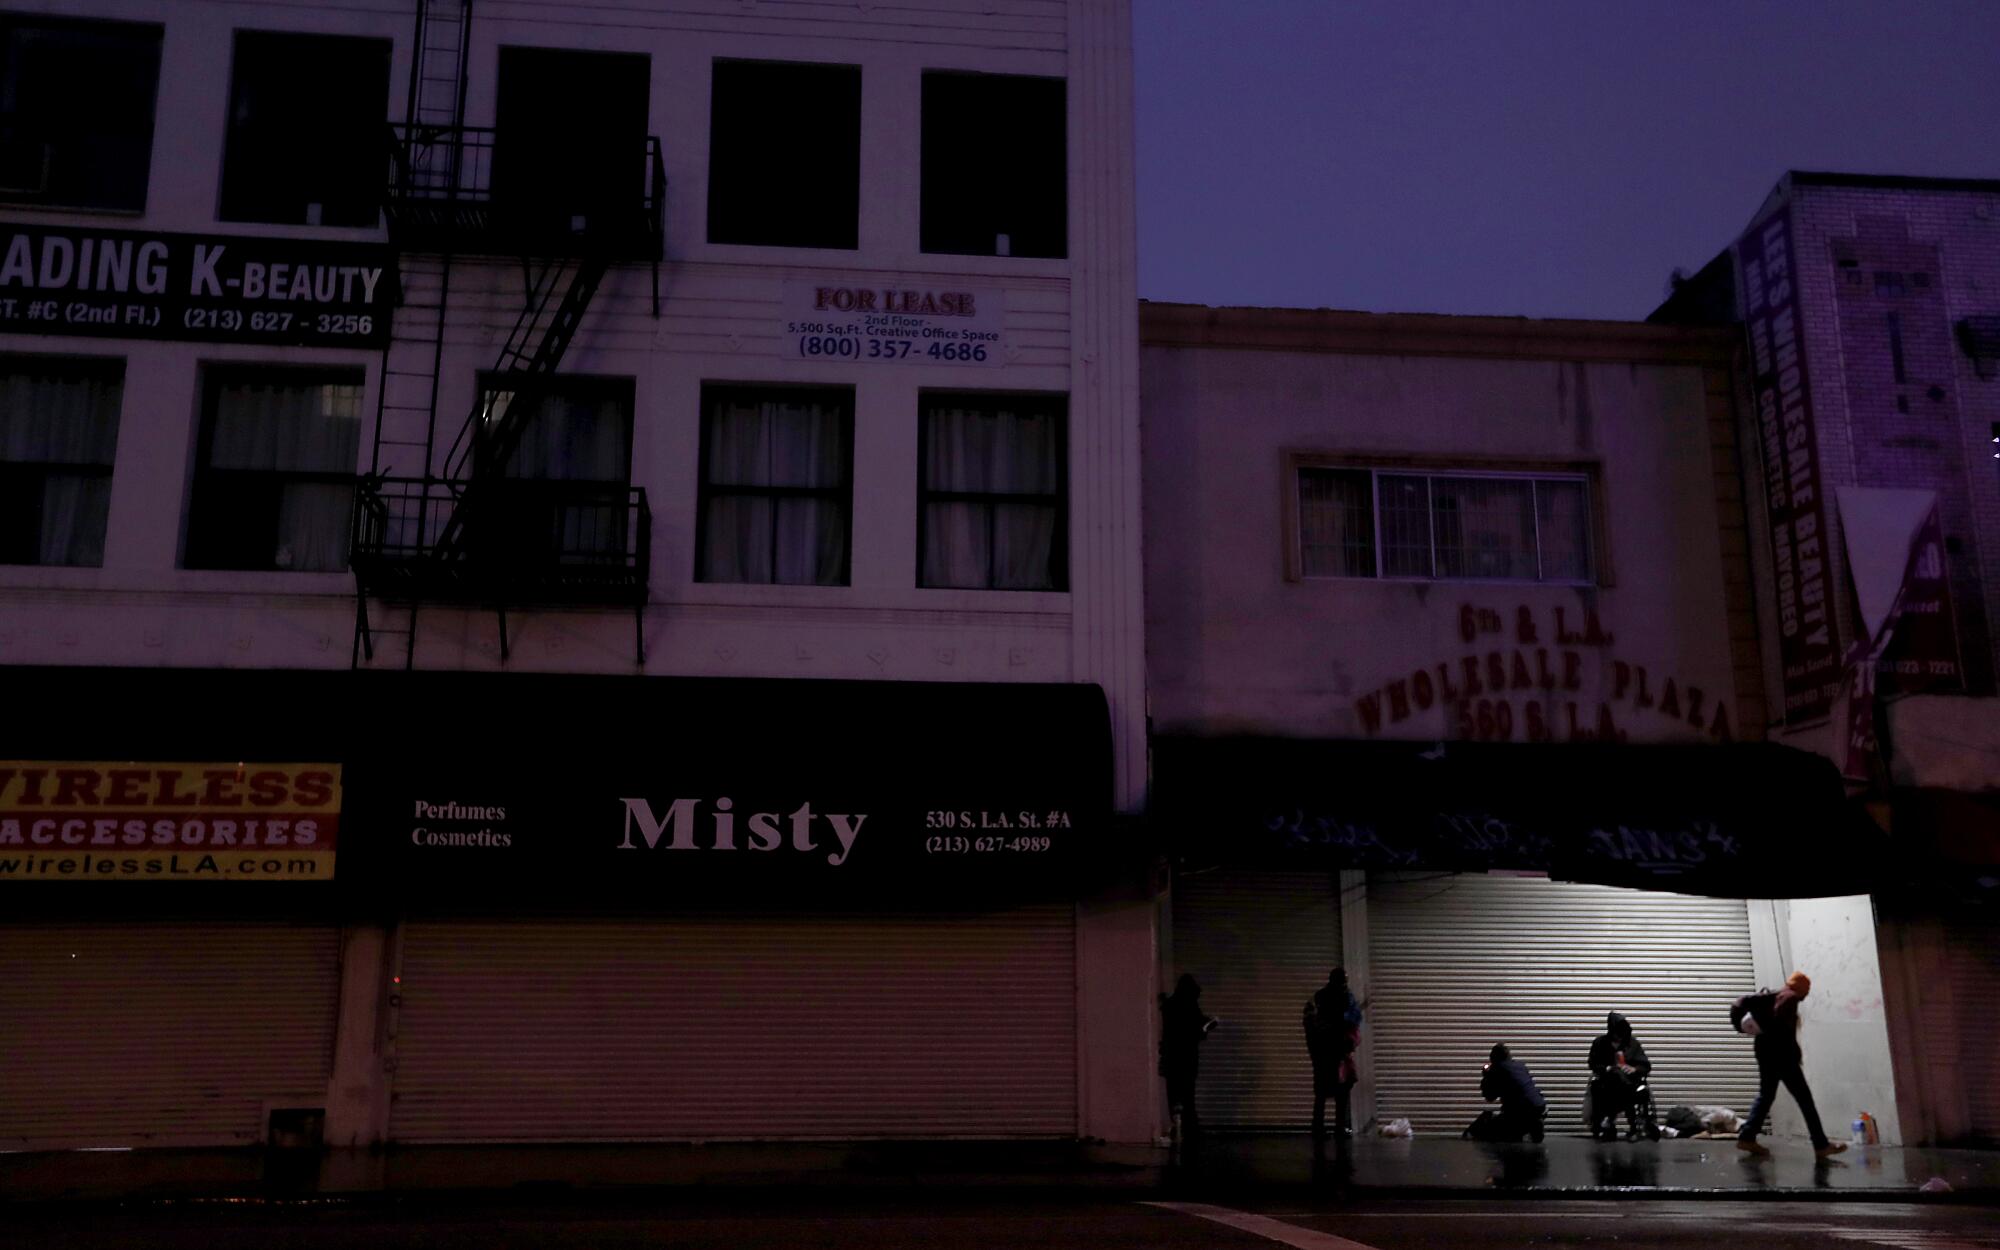 Homeless men gather under awnings of shuttered businesses along Los Angeles Street in the downtown garment district.